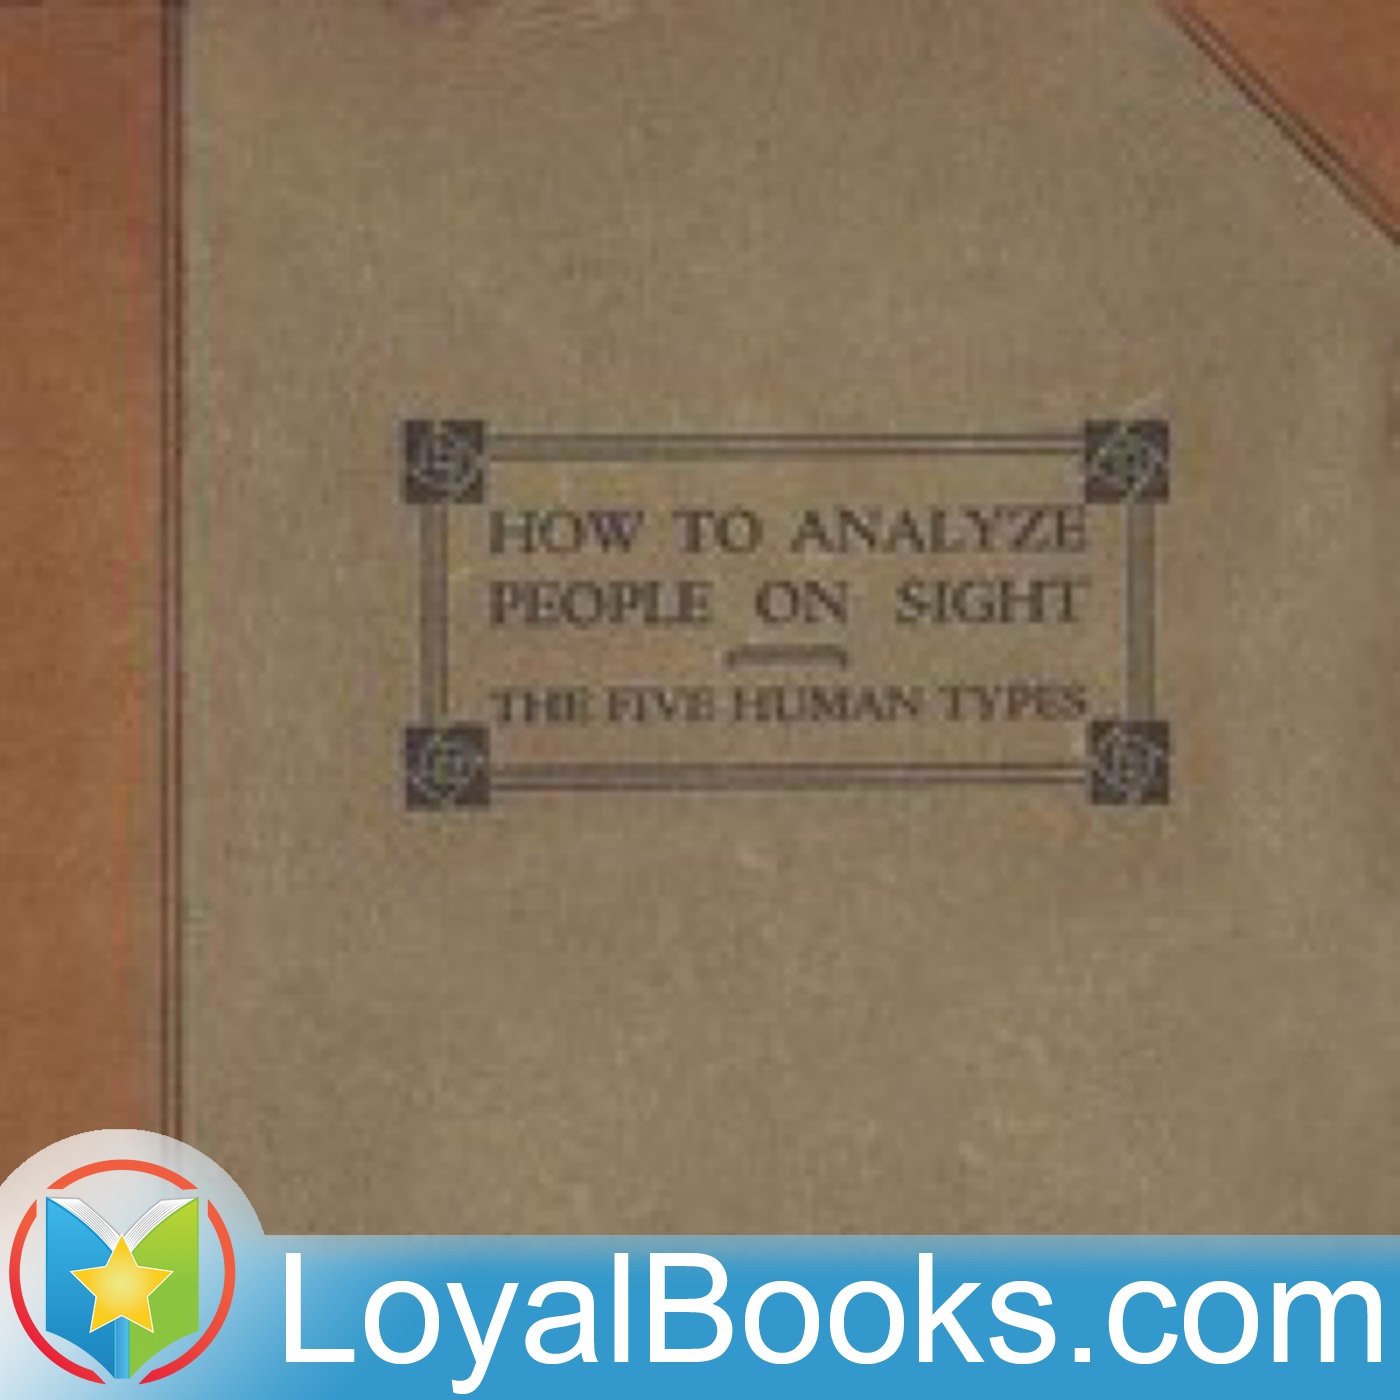 How to Analyze People on Sight Through the Science of Human Analysis: The Five Human Types by Elsie ...